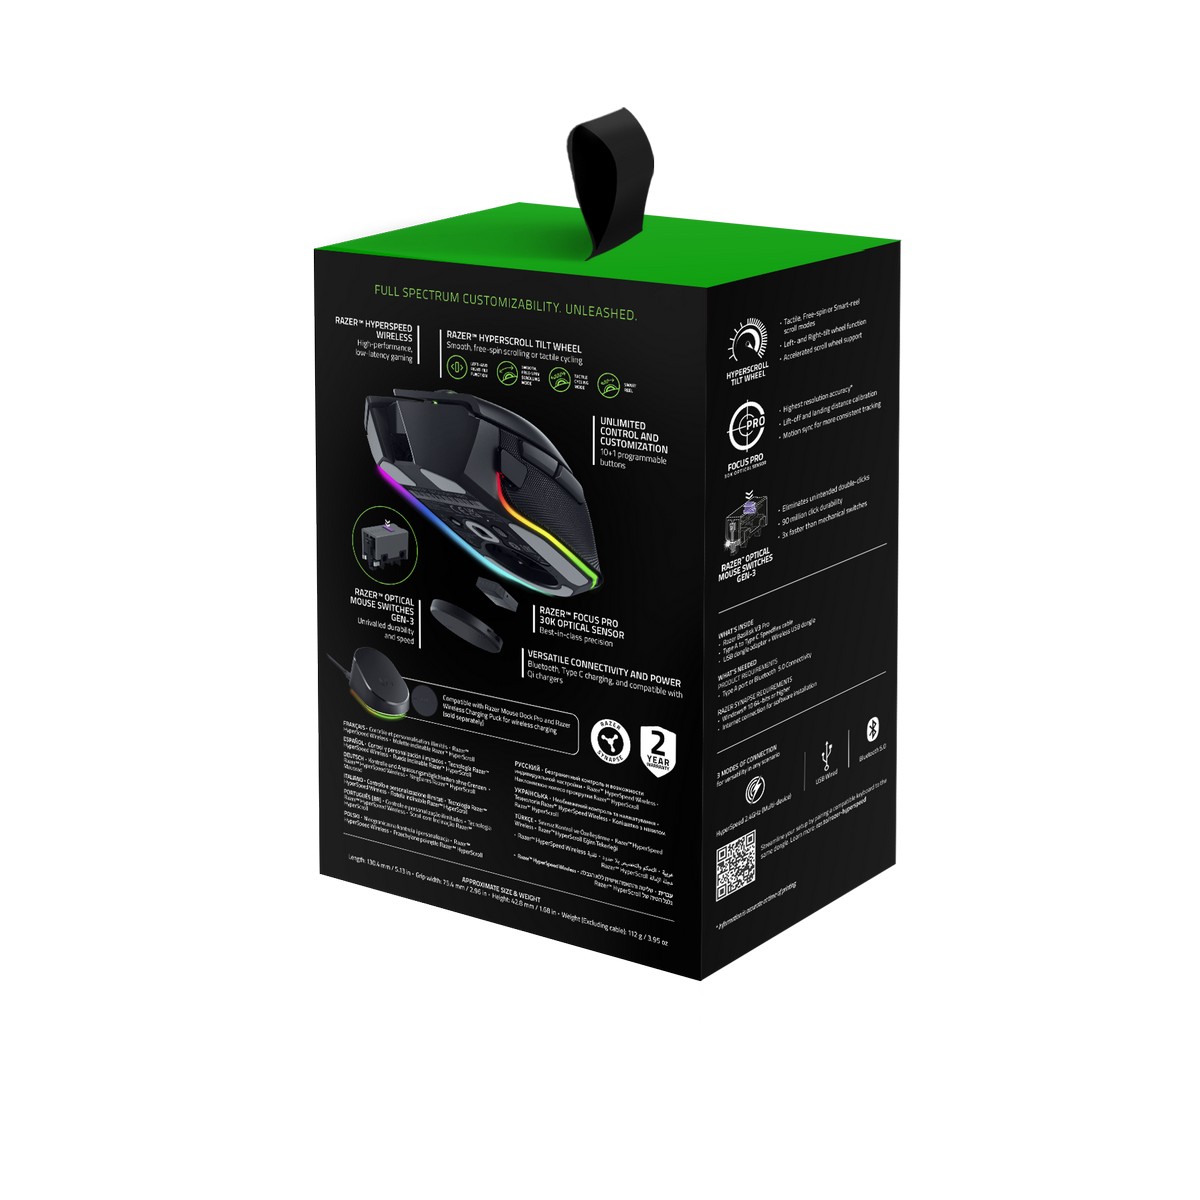 Razer Basilisk V3 Pro and Mouse Dock Pro review: Qi charging and